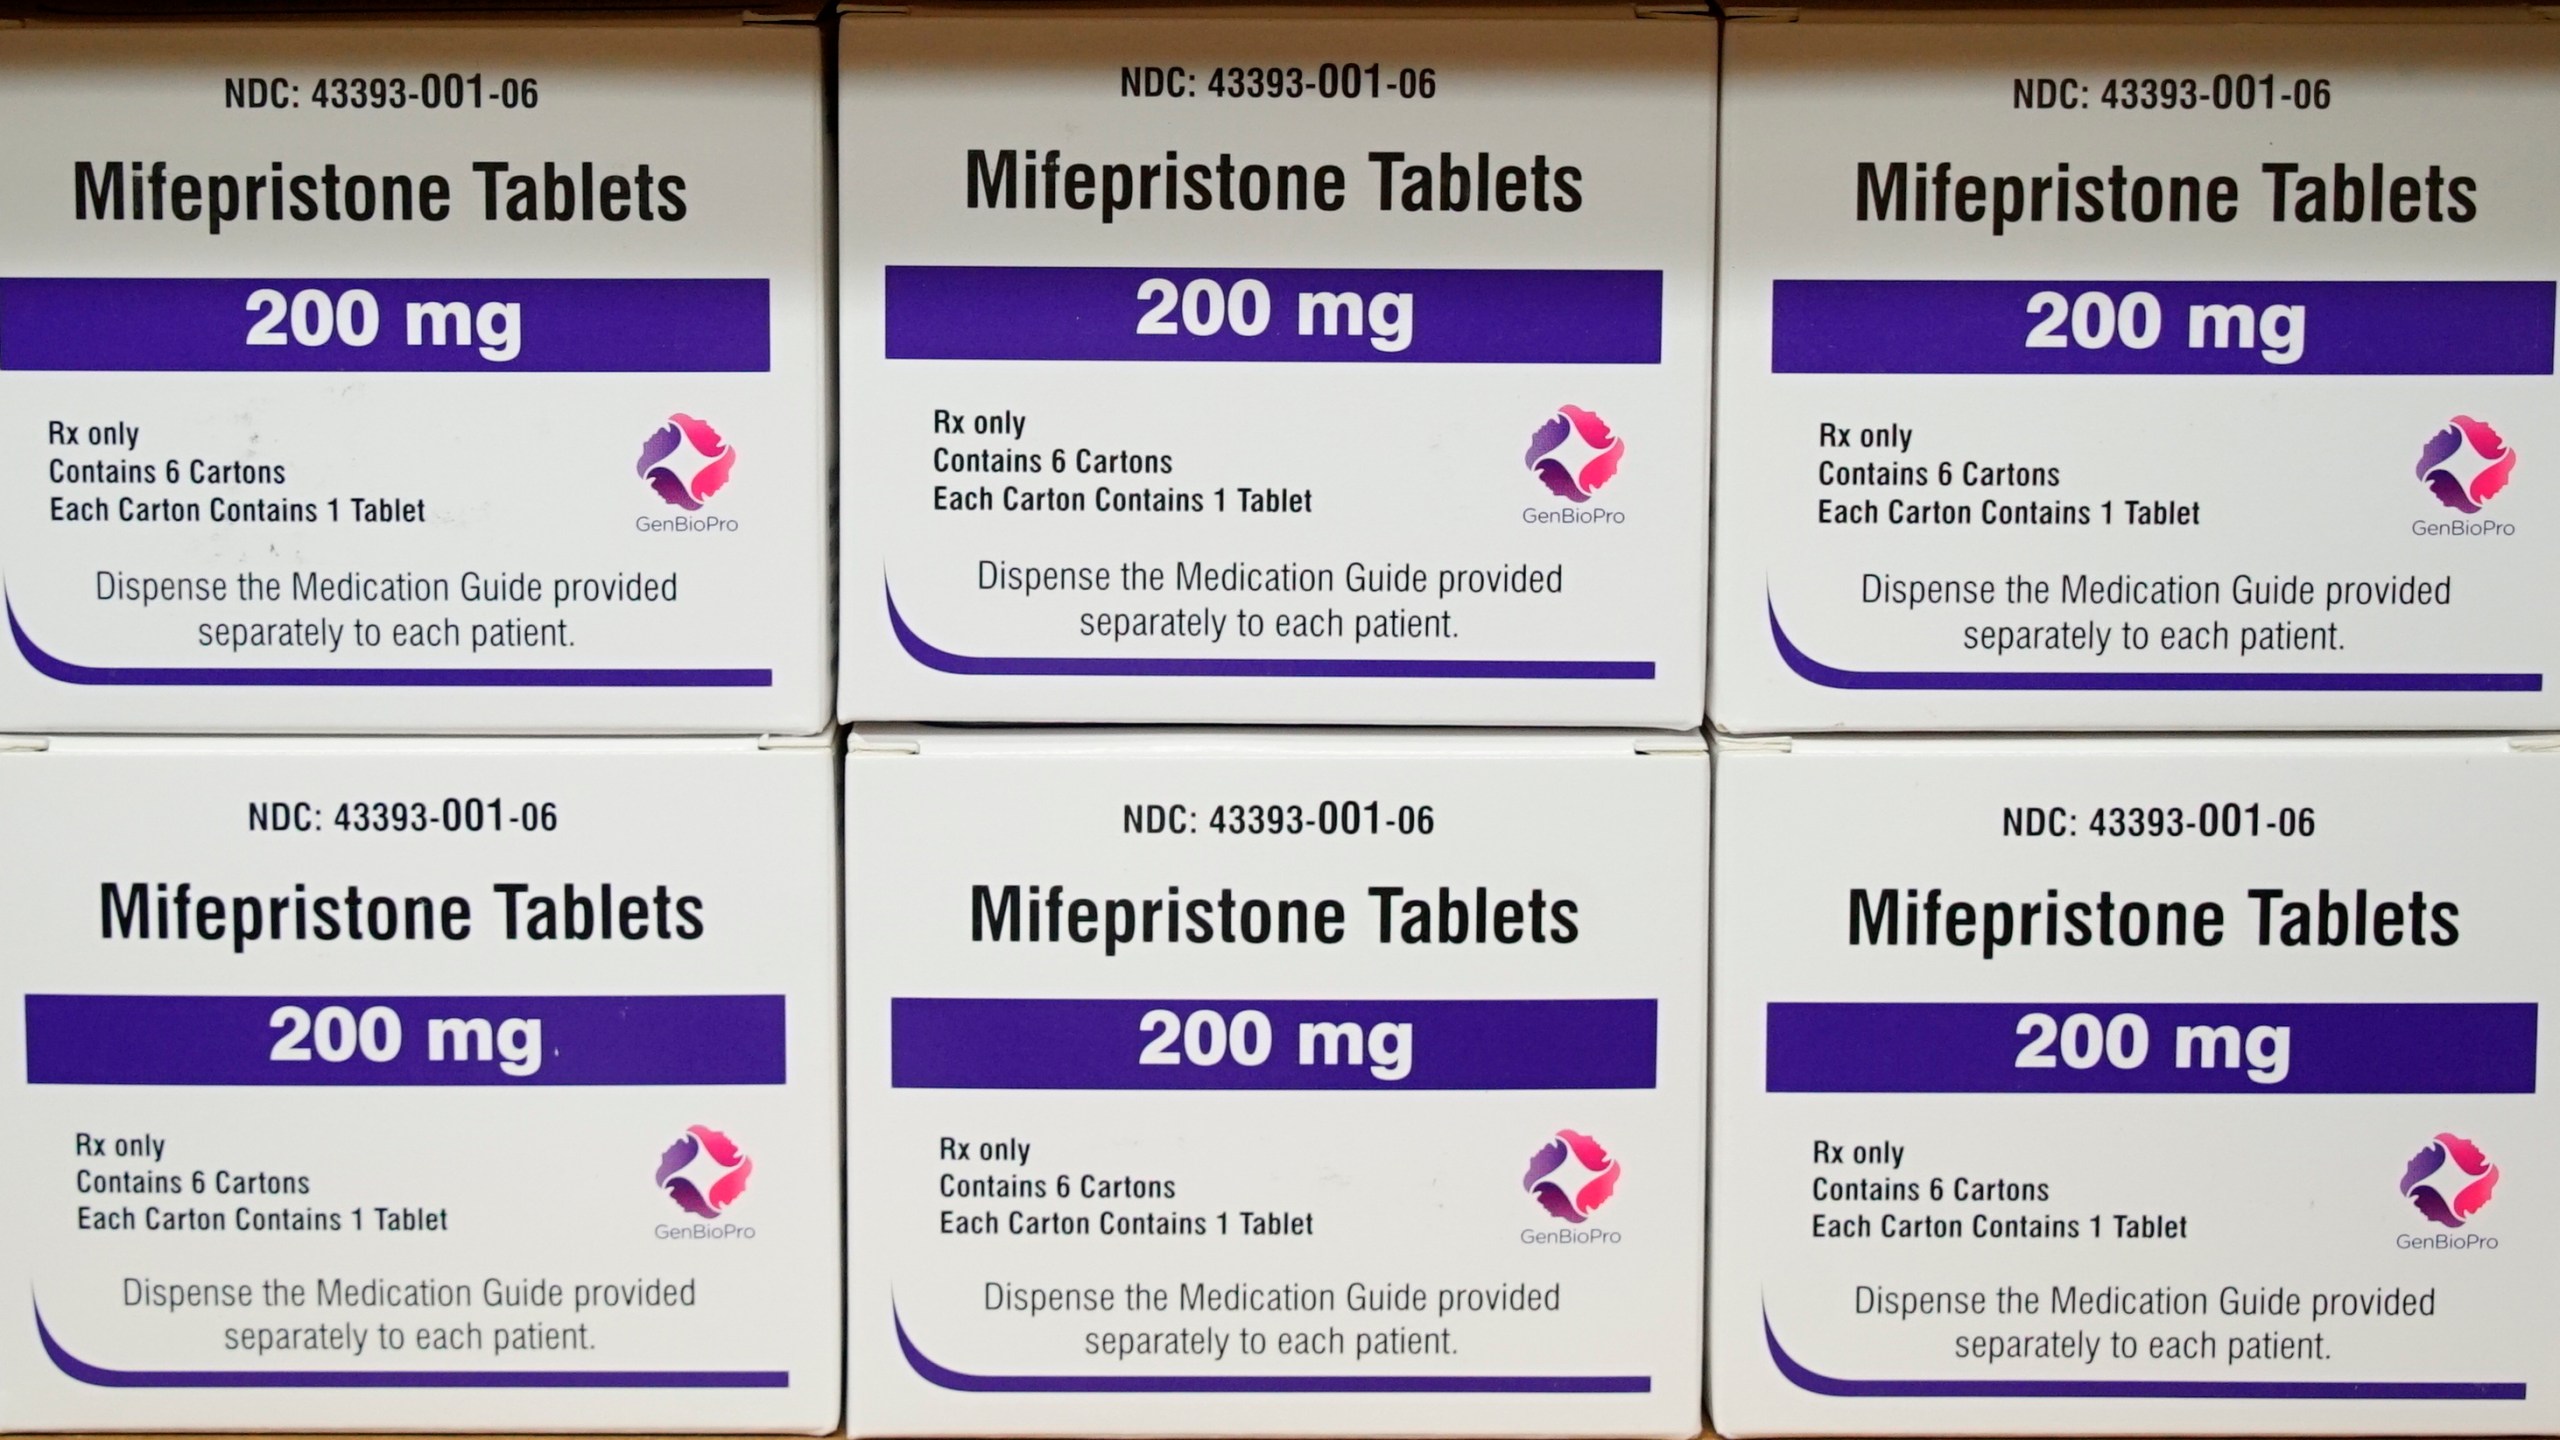 FILE - Boxes of the drug mifepristone sit on a shelf at the West Alabama Women's Center in Tuscaloosa, Ala., on March 16, 2022. On Tuesday, March 26, 2024, the U.S. Supreme Court will take up a case that could impact how women get access to mifepristone, one of the two pills used in the most common type of abortion in the nation. (AP Photo/Allen G. Breed, File)